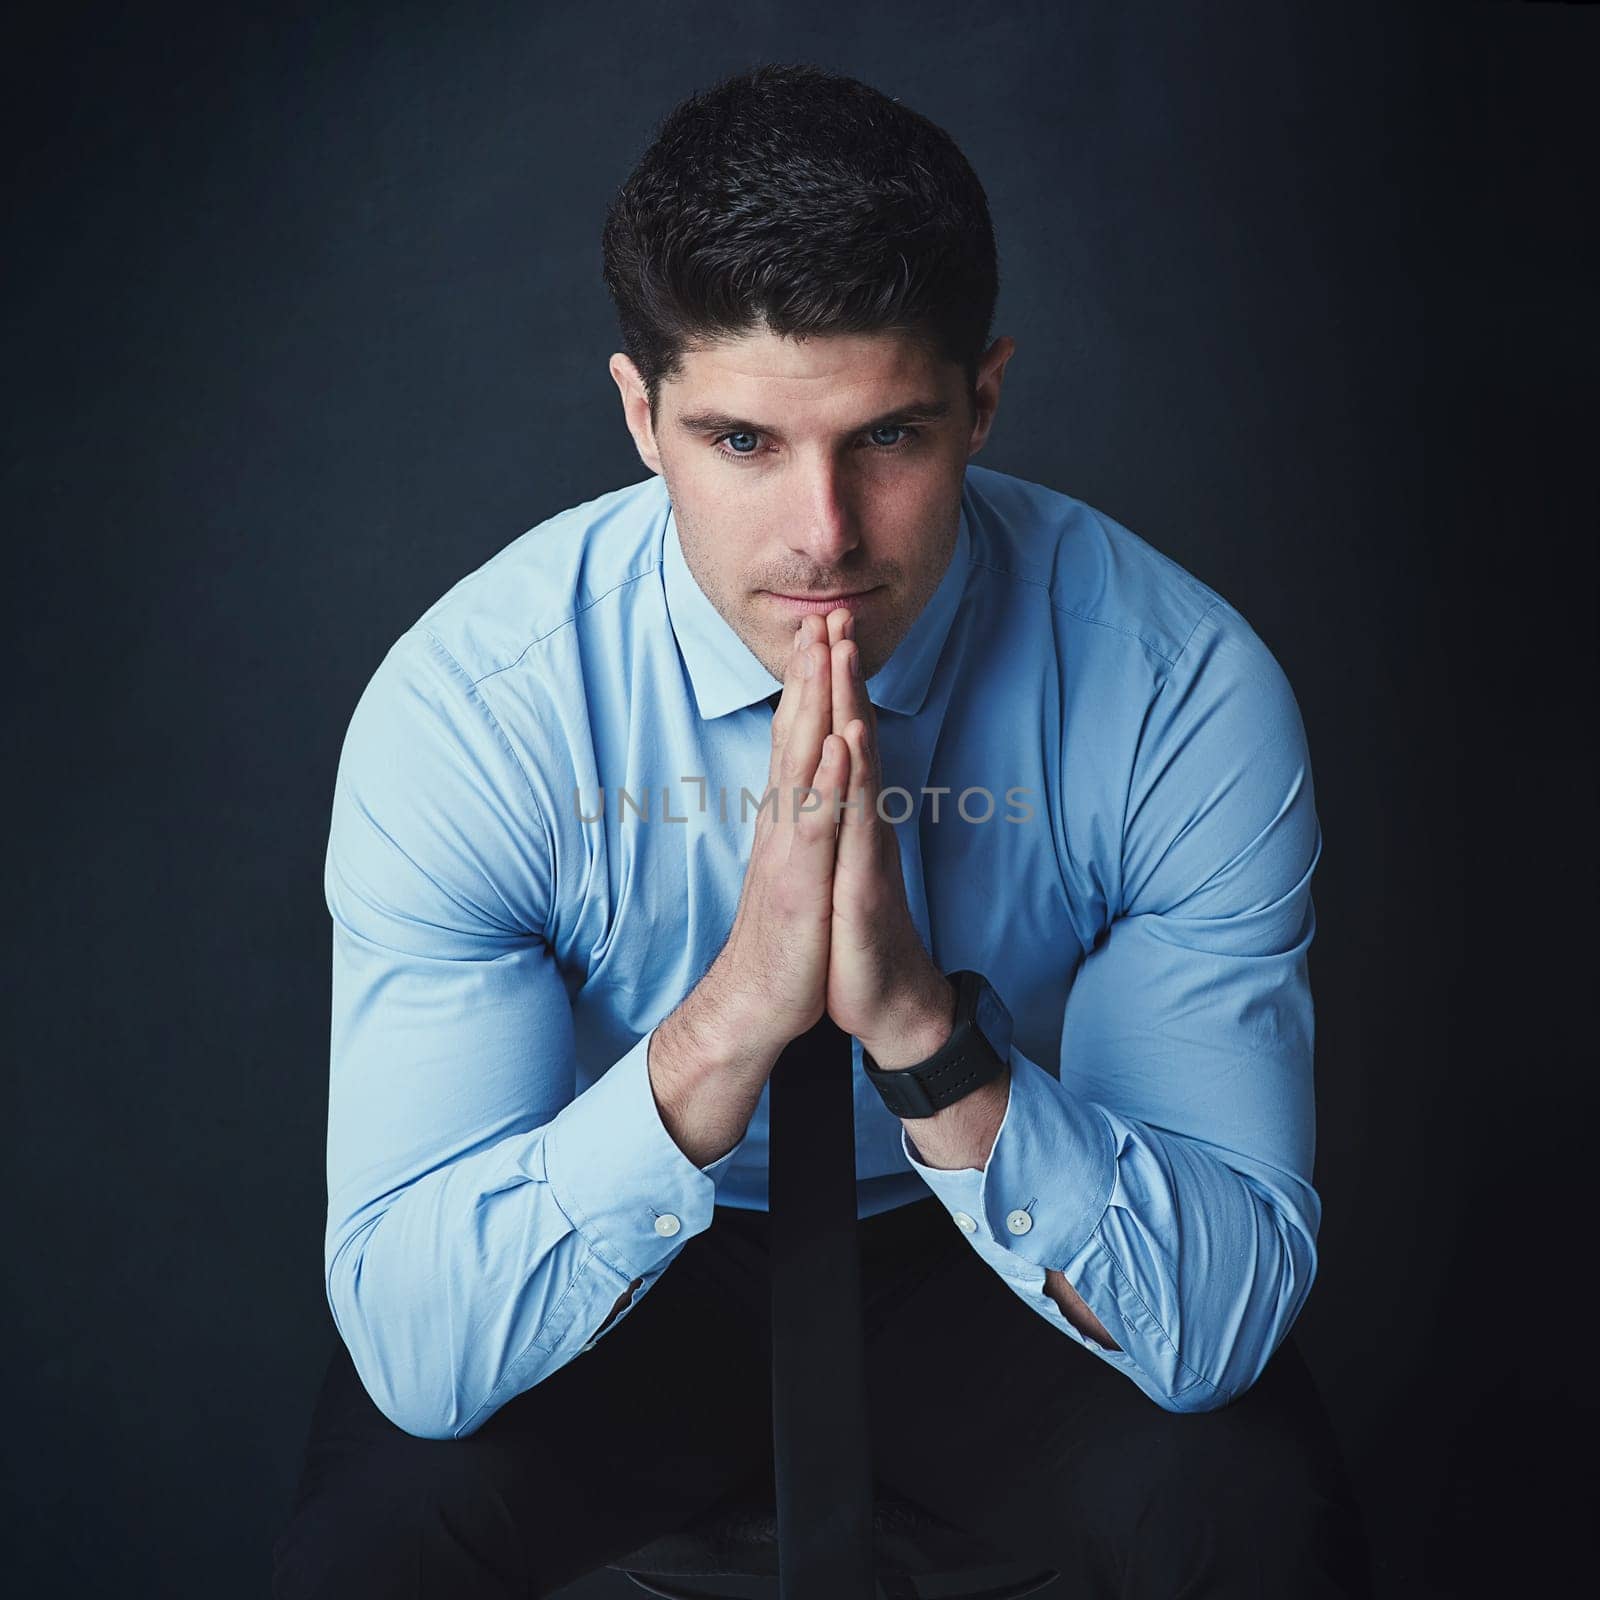 You are bigger than your fears held in your mind. Studio shot of a young businessman looking thoughtful against a dark background